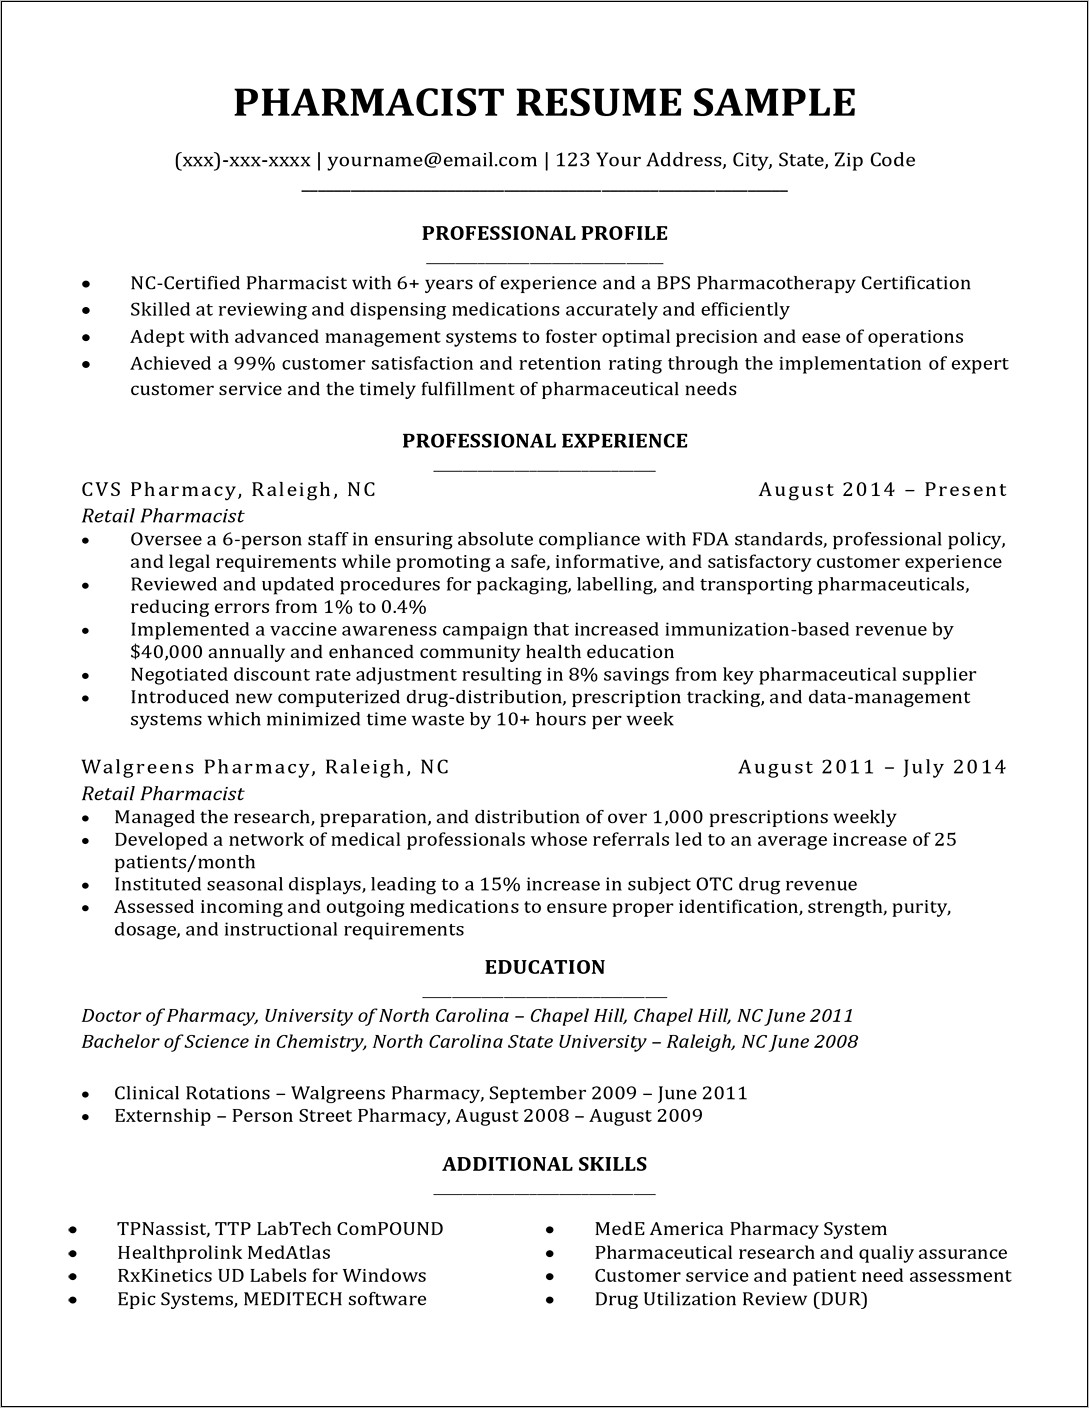 Resume Review And Job Retention